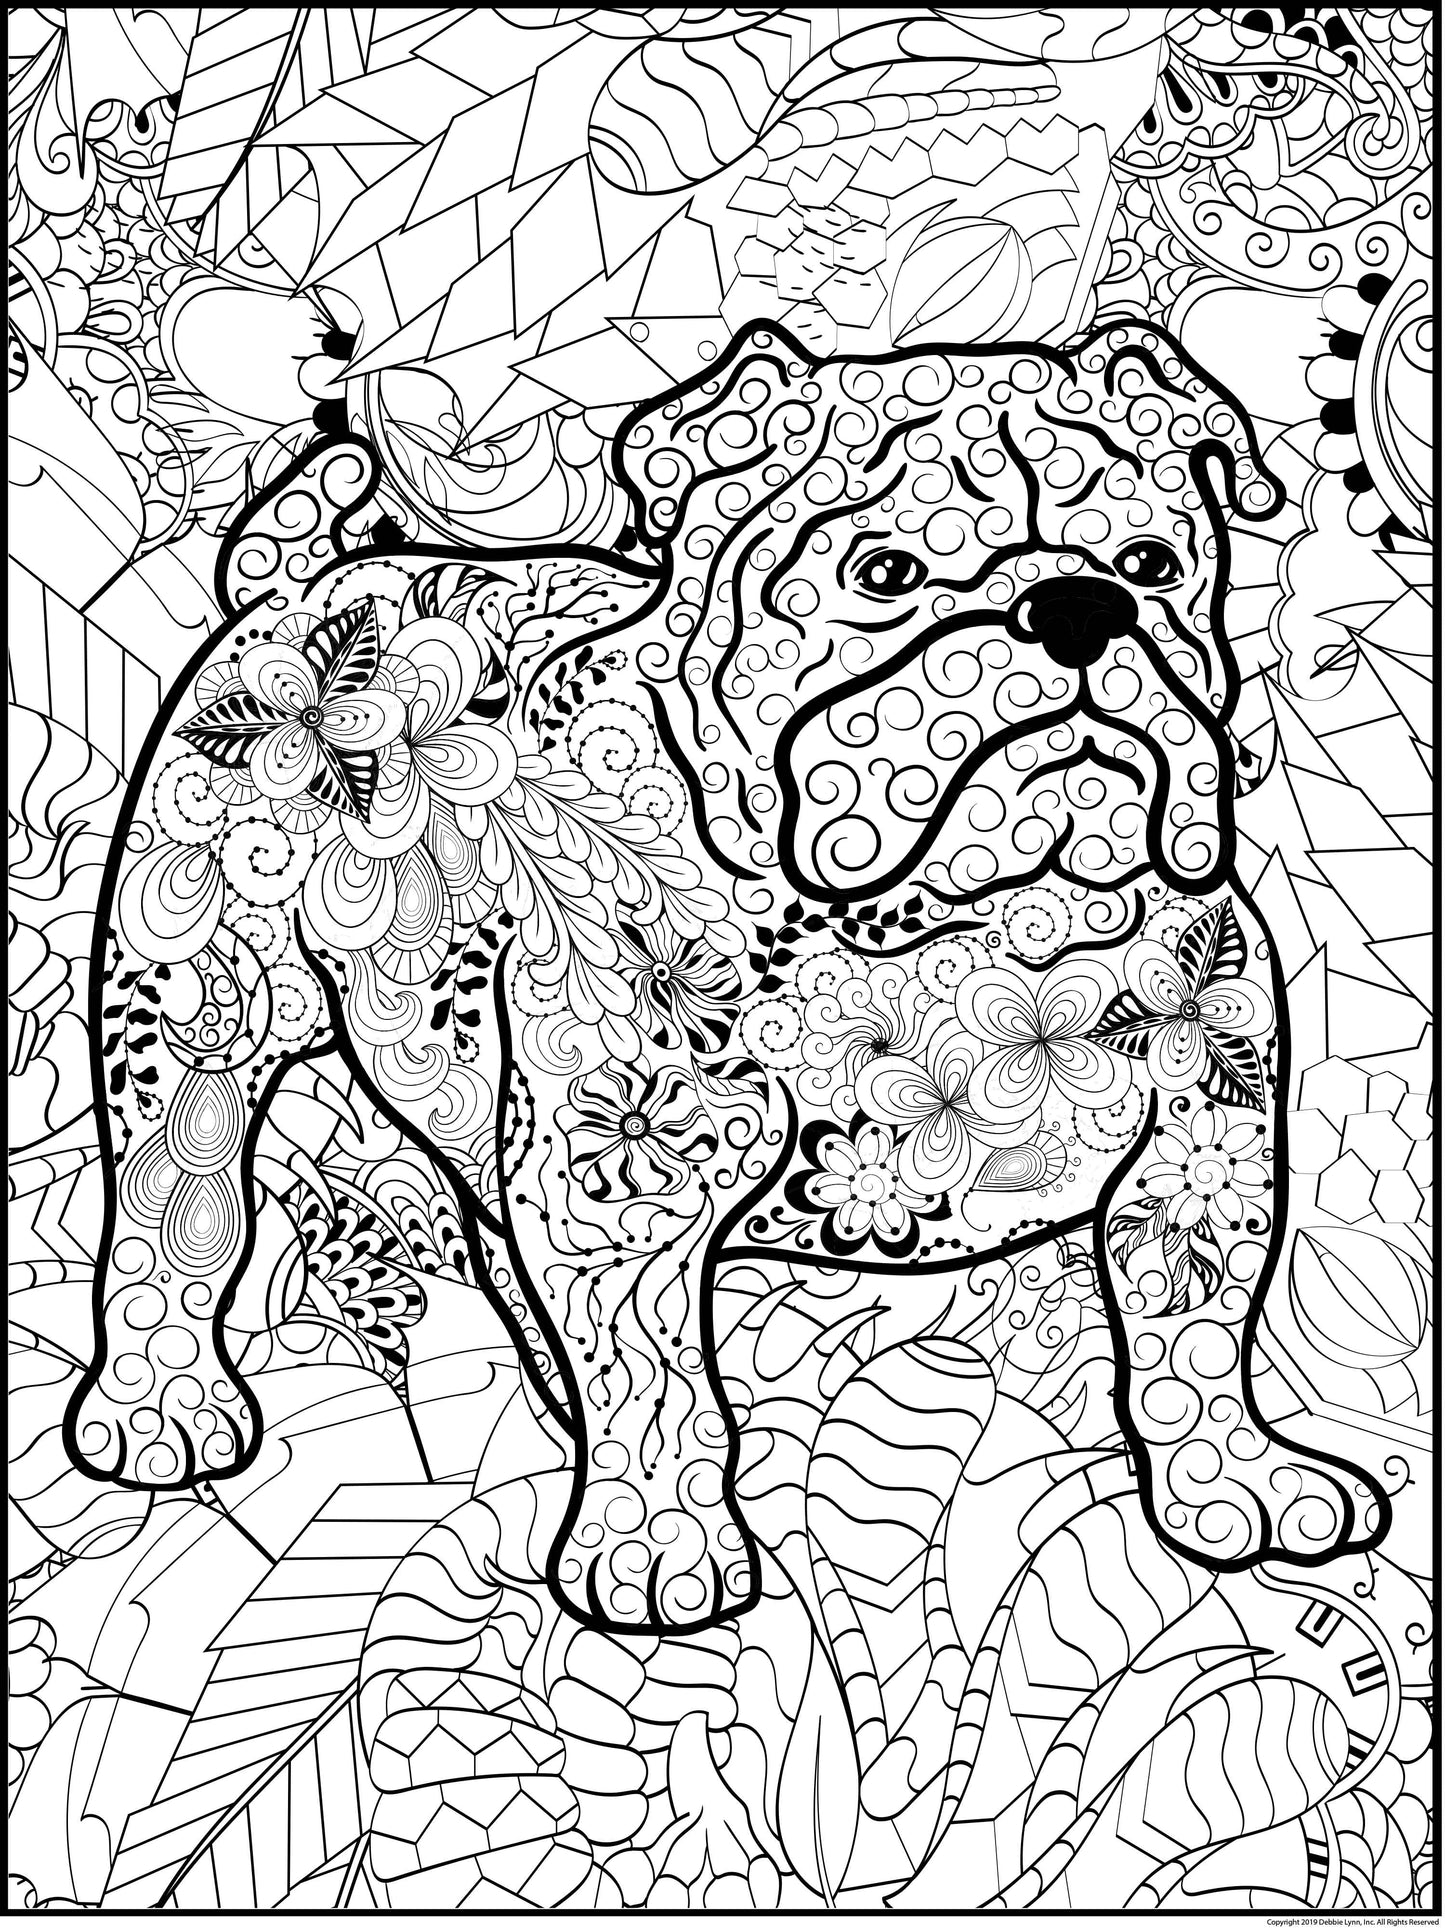 Debbie Lynn Rolled Coloring Posters 24x36 inches  | Choose from 30 Designs